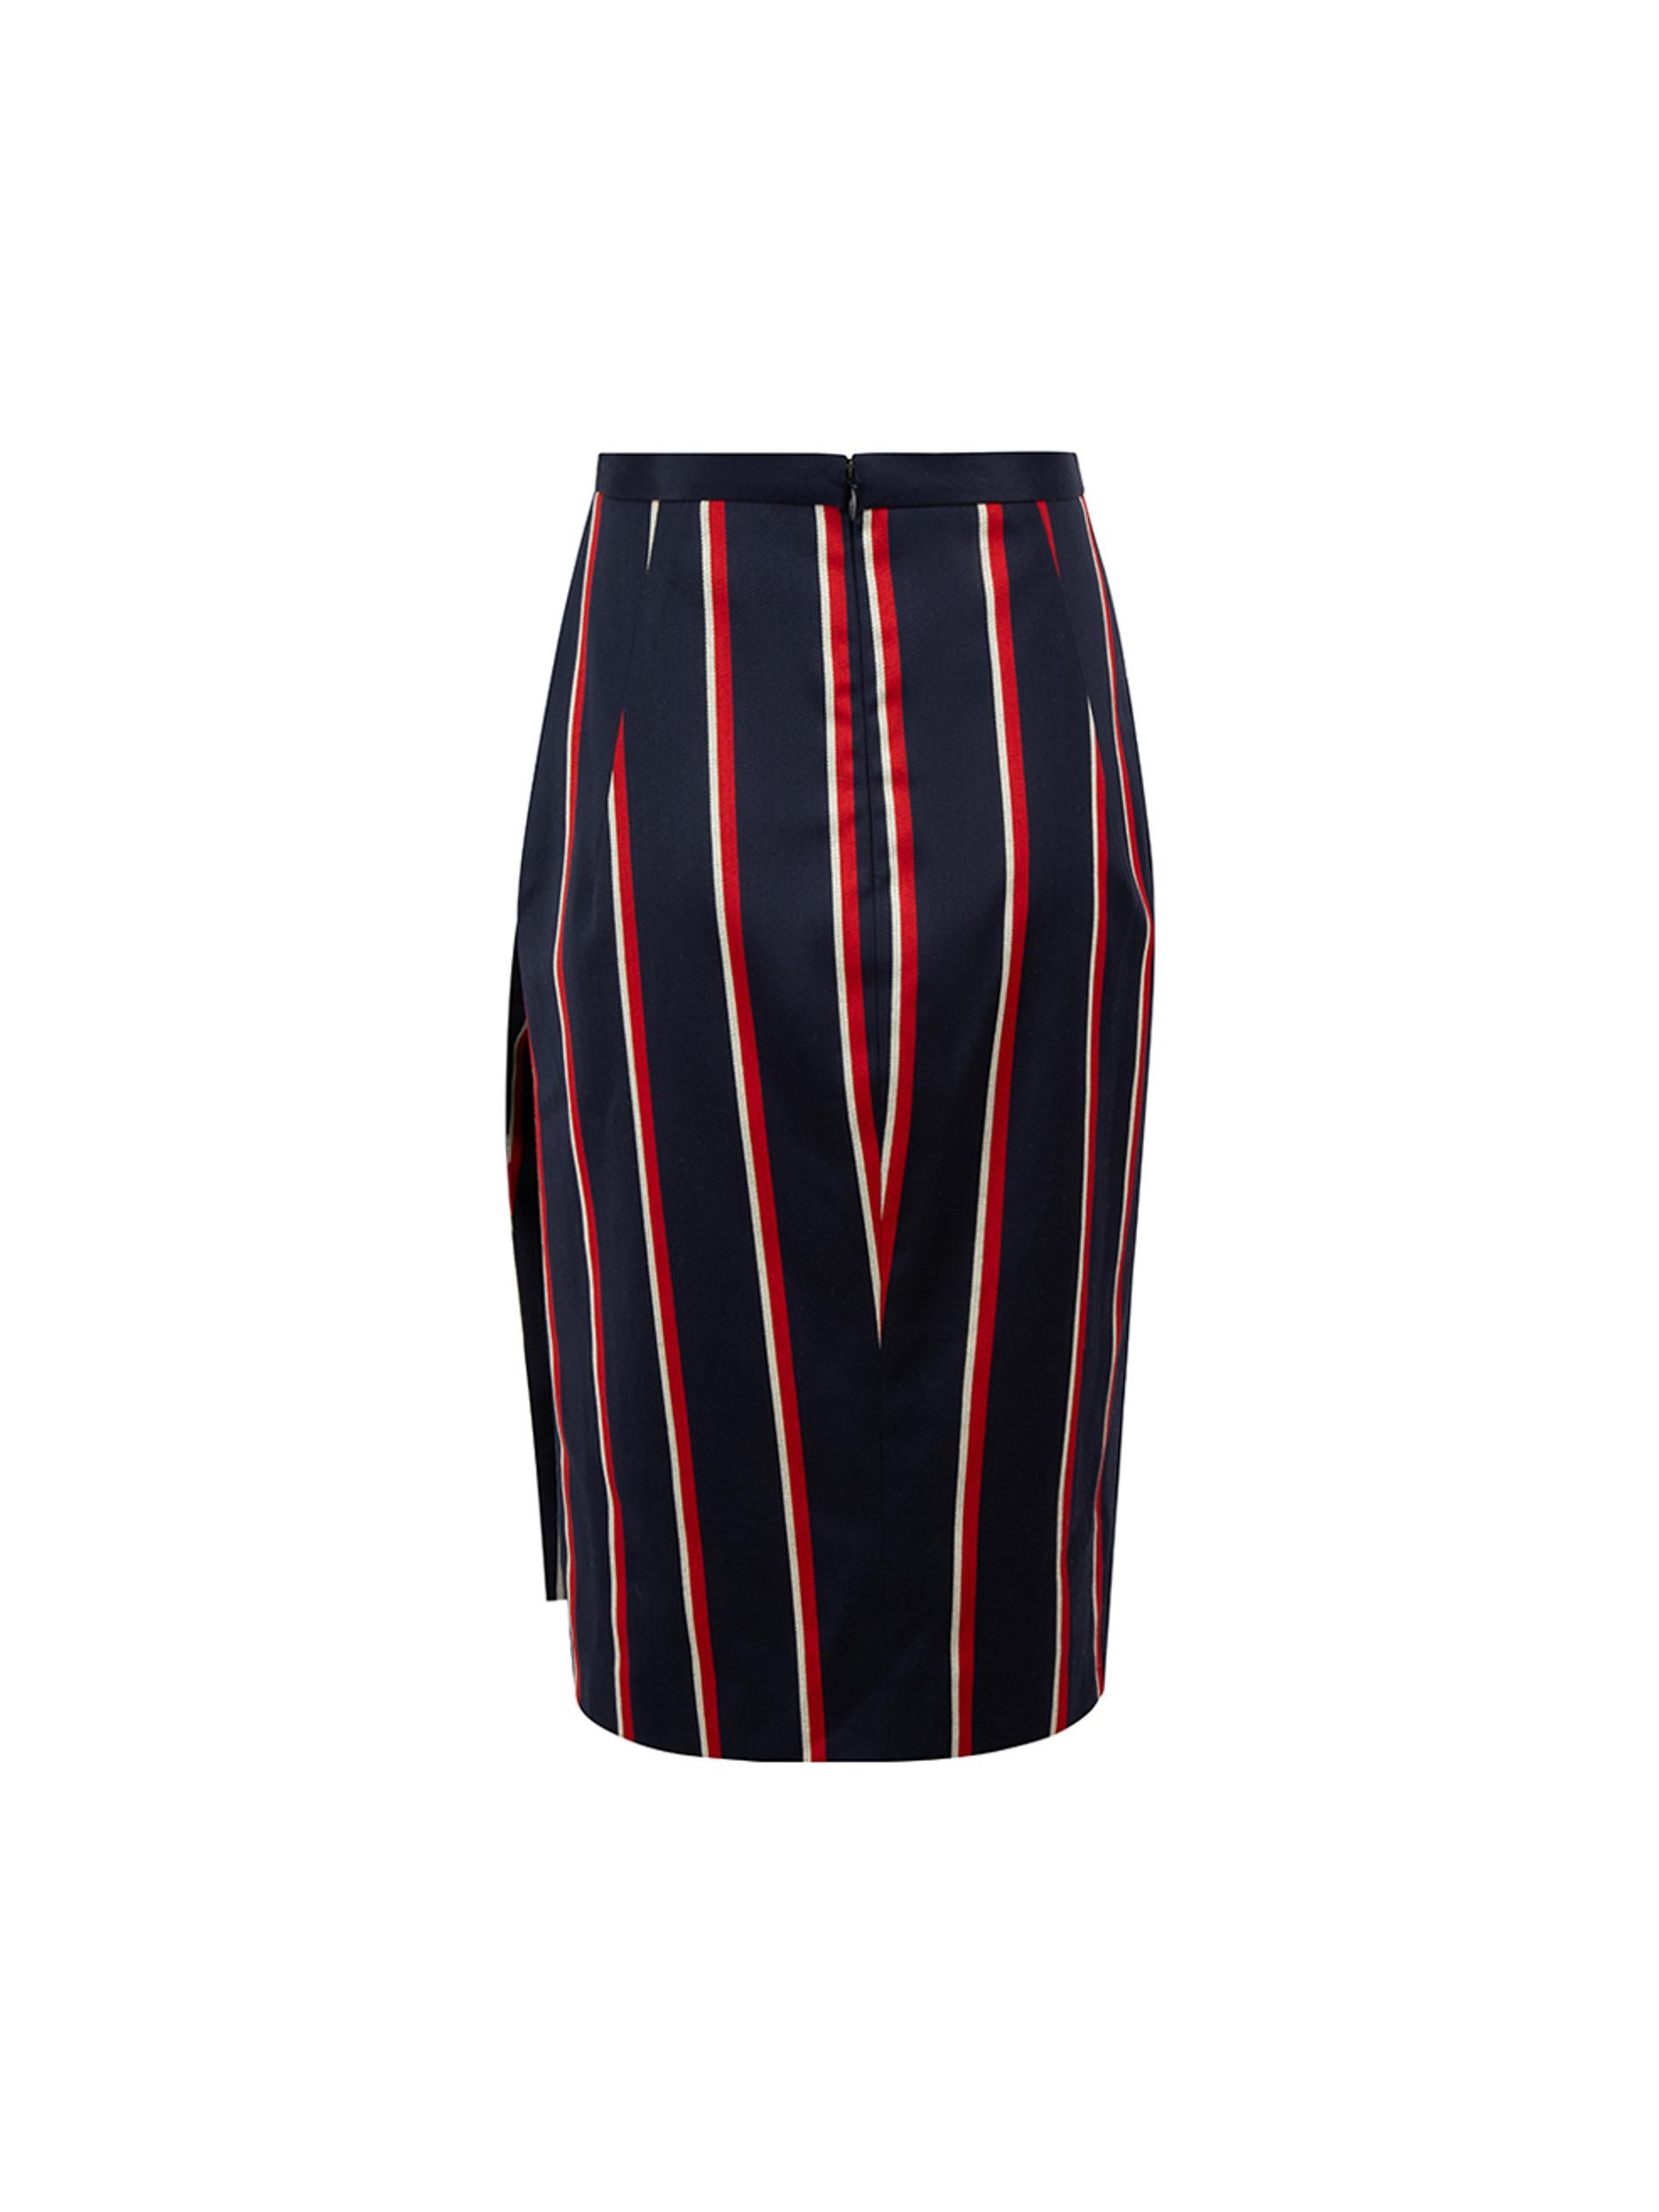 Altuzarra Navy Wool Striped Knee Length Skirt Size M In Good Condition For Sale In London, GB